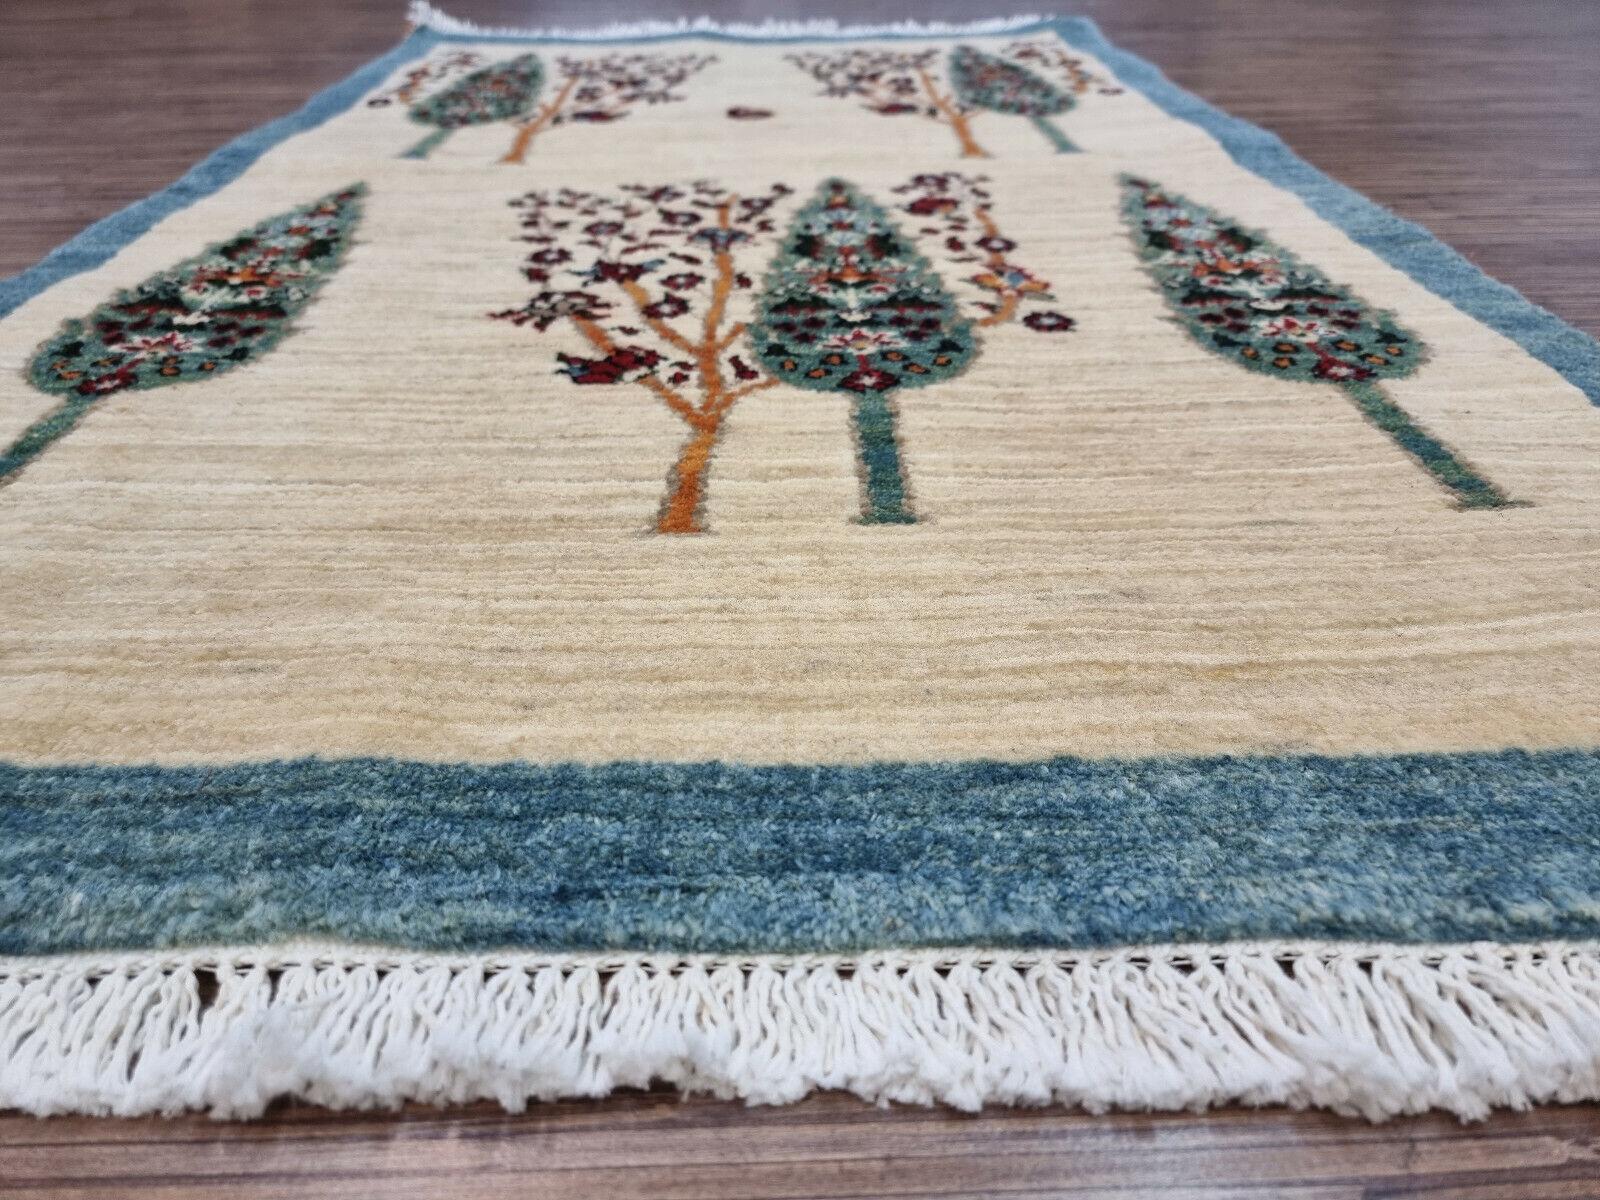 Handmade Vintage Persian Style Gabbeh Rug 2.4' x 4', 1980s - 1D117 For Sale 2